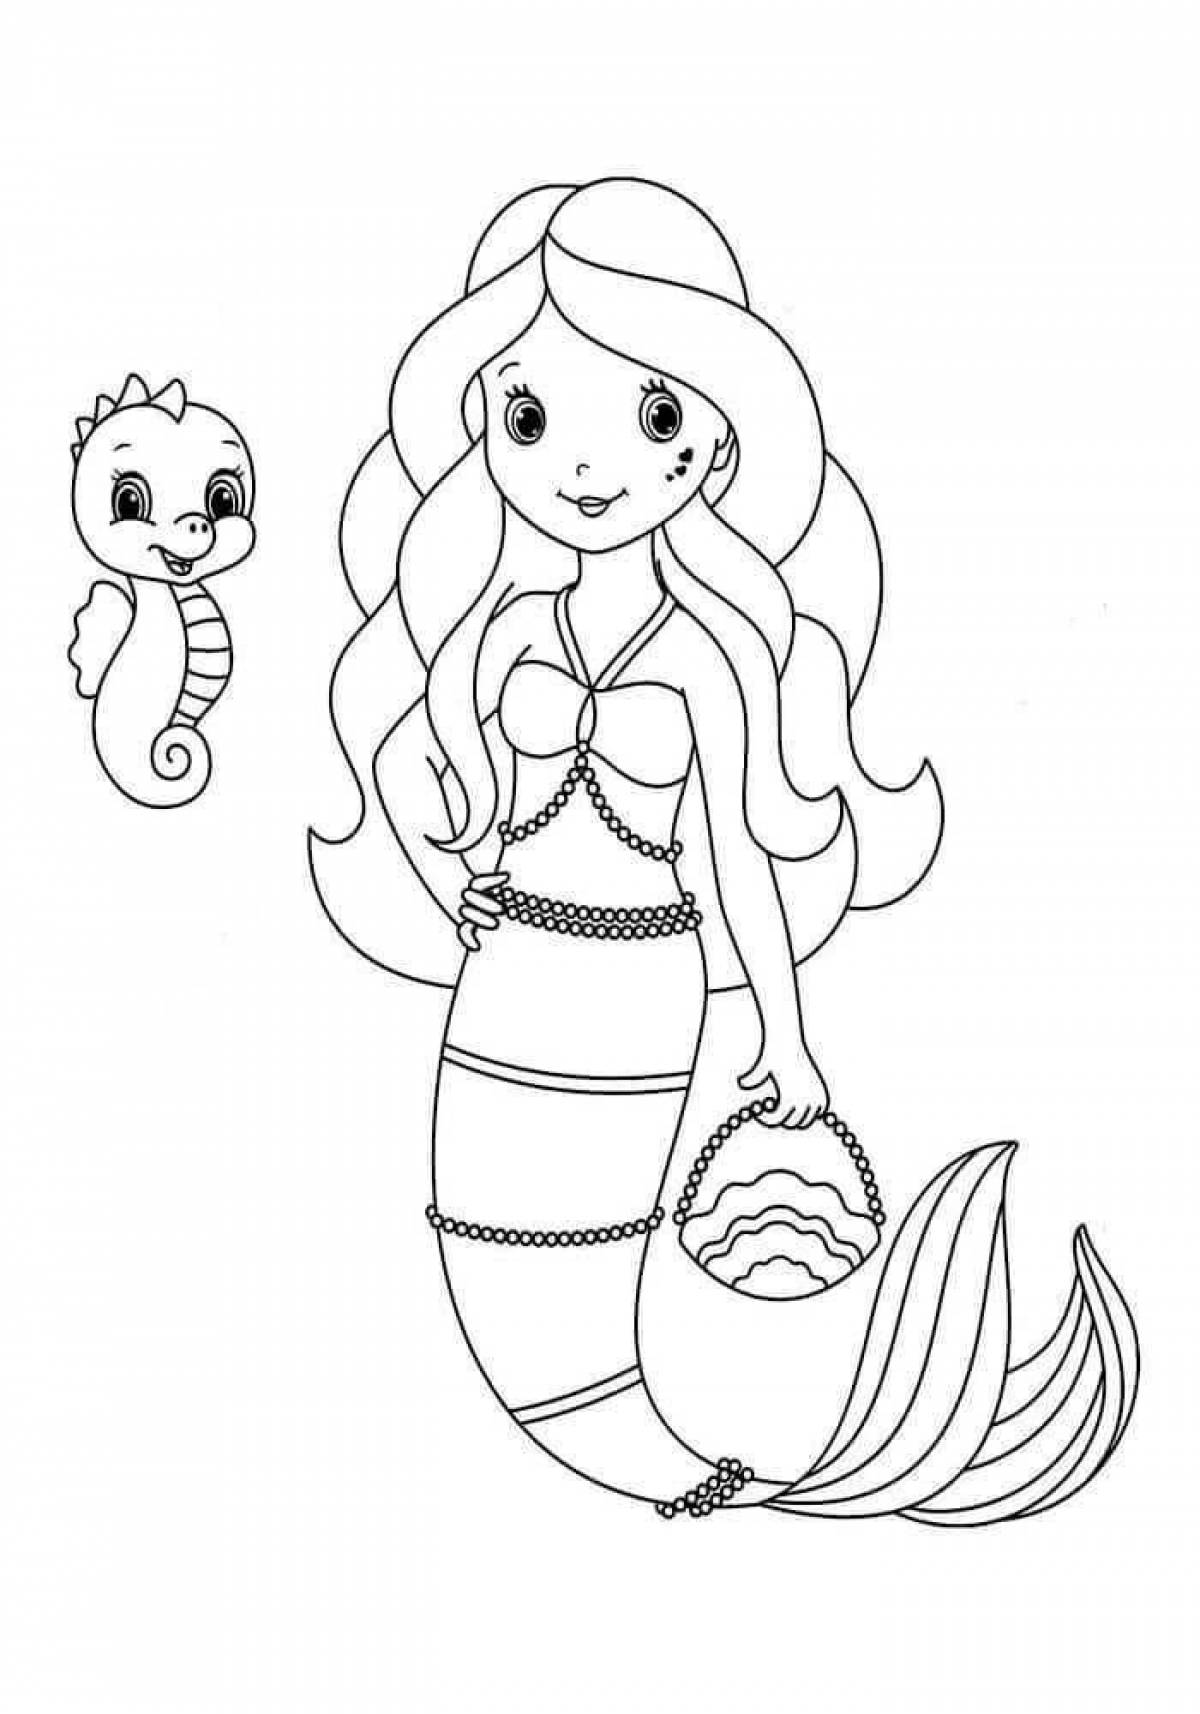 Funny little mermaid coloring book for kids 3-4 years old